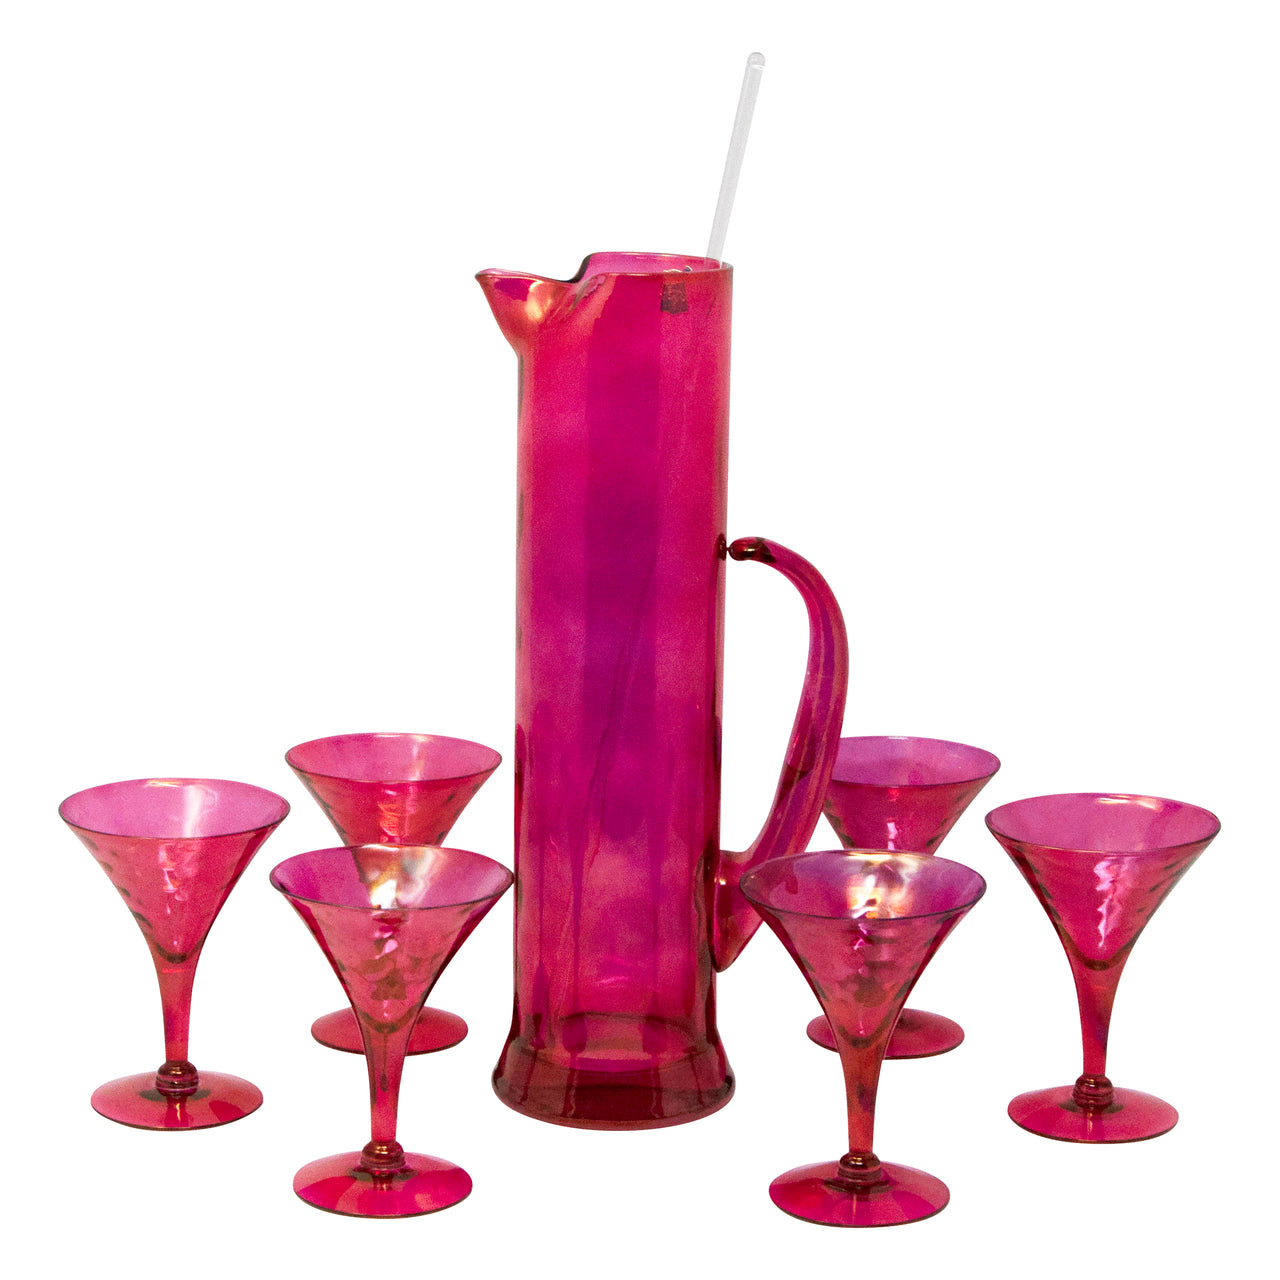 Colorful Cocktail Pitcher